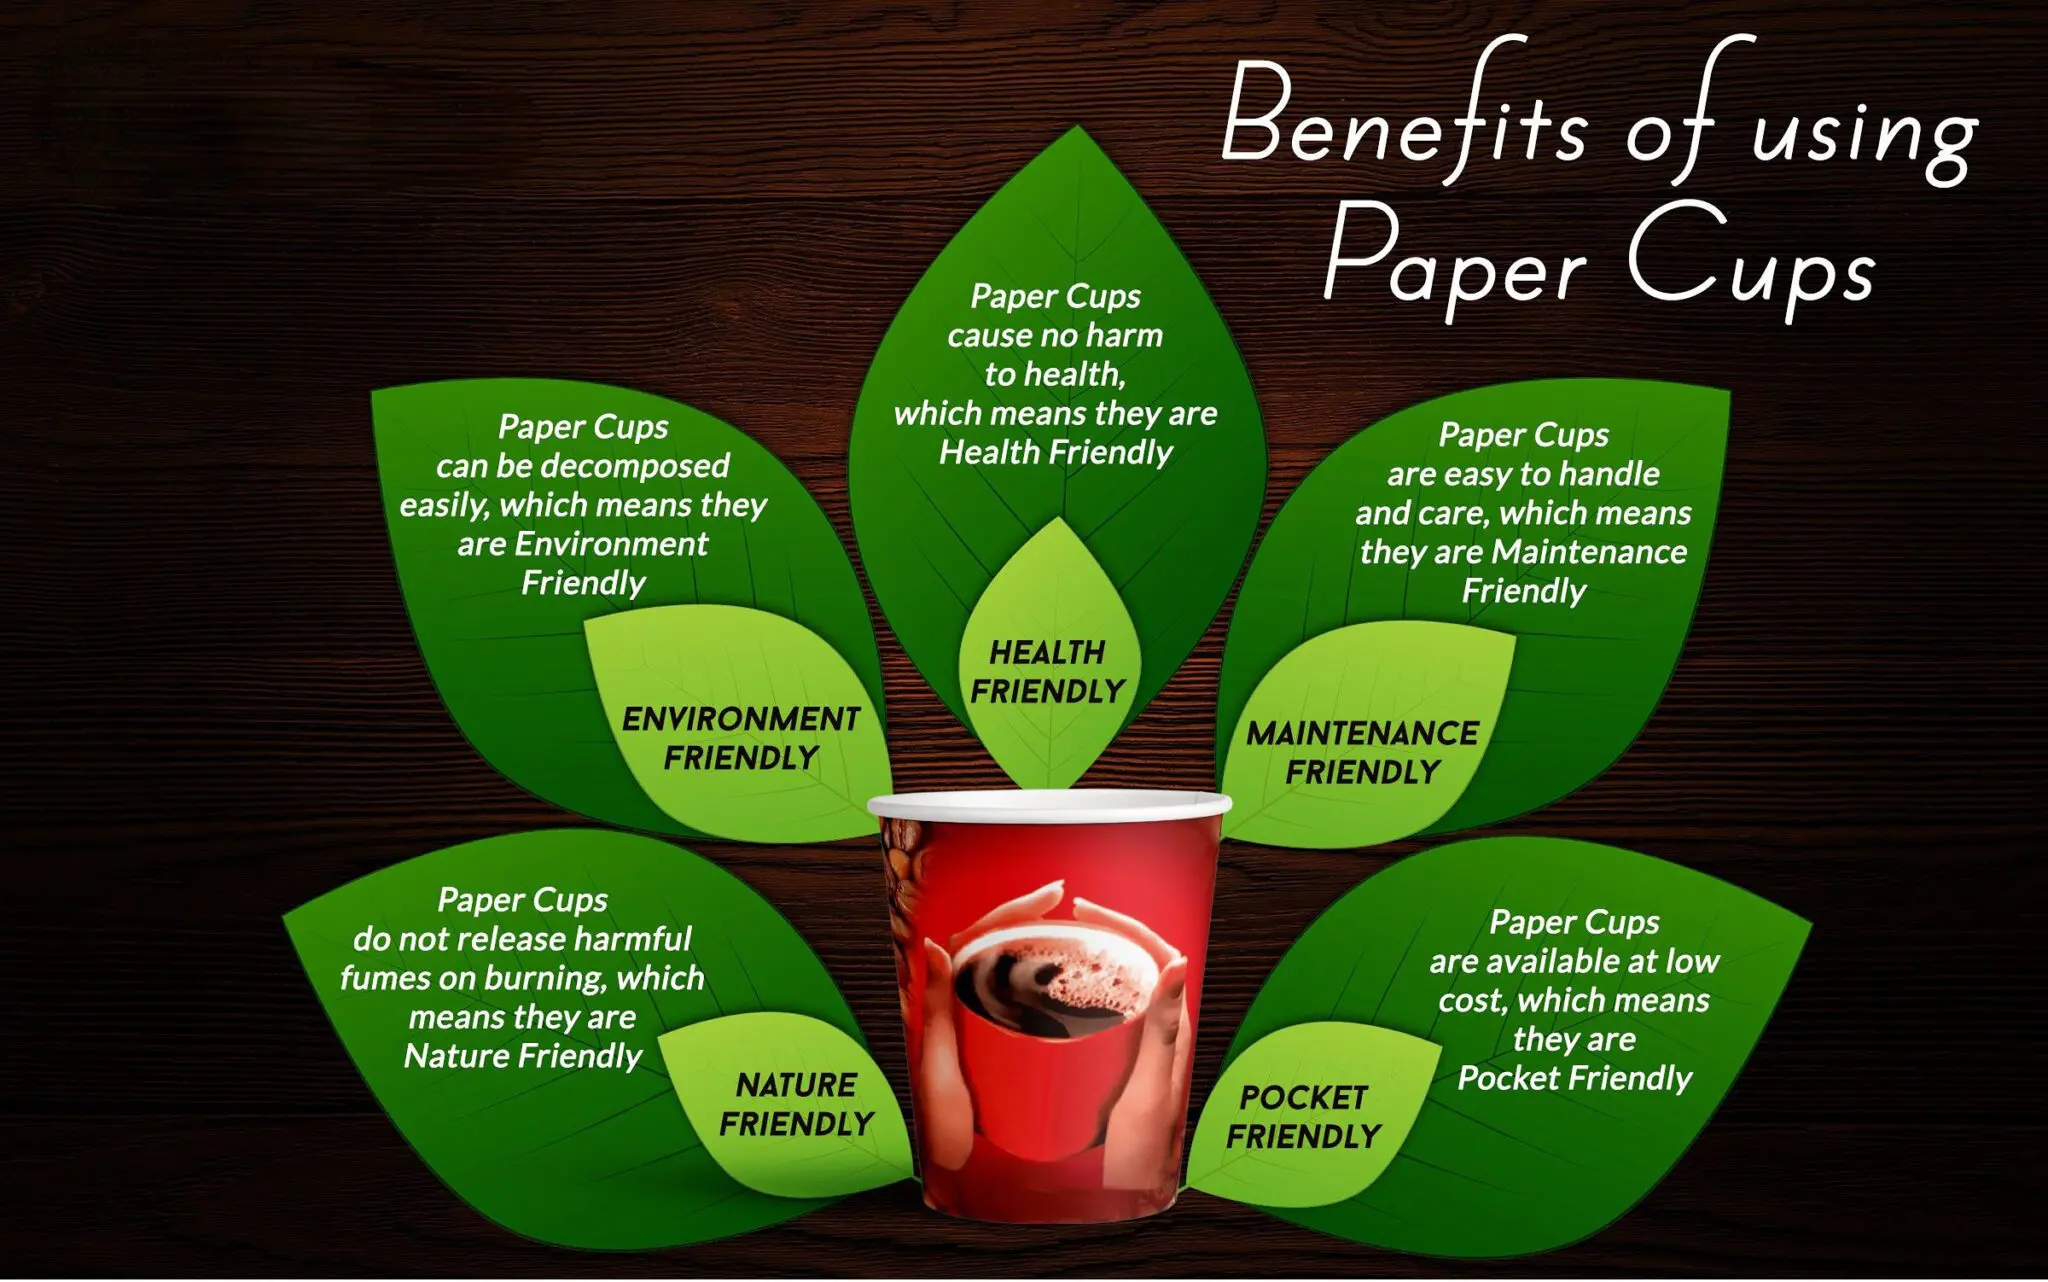 10 Creative Ways to Repurpose Your Used Paper Cups